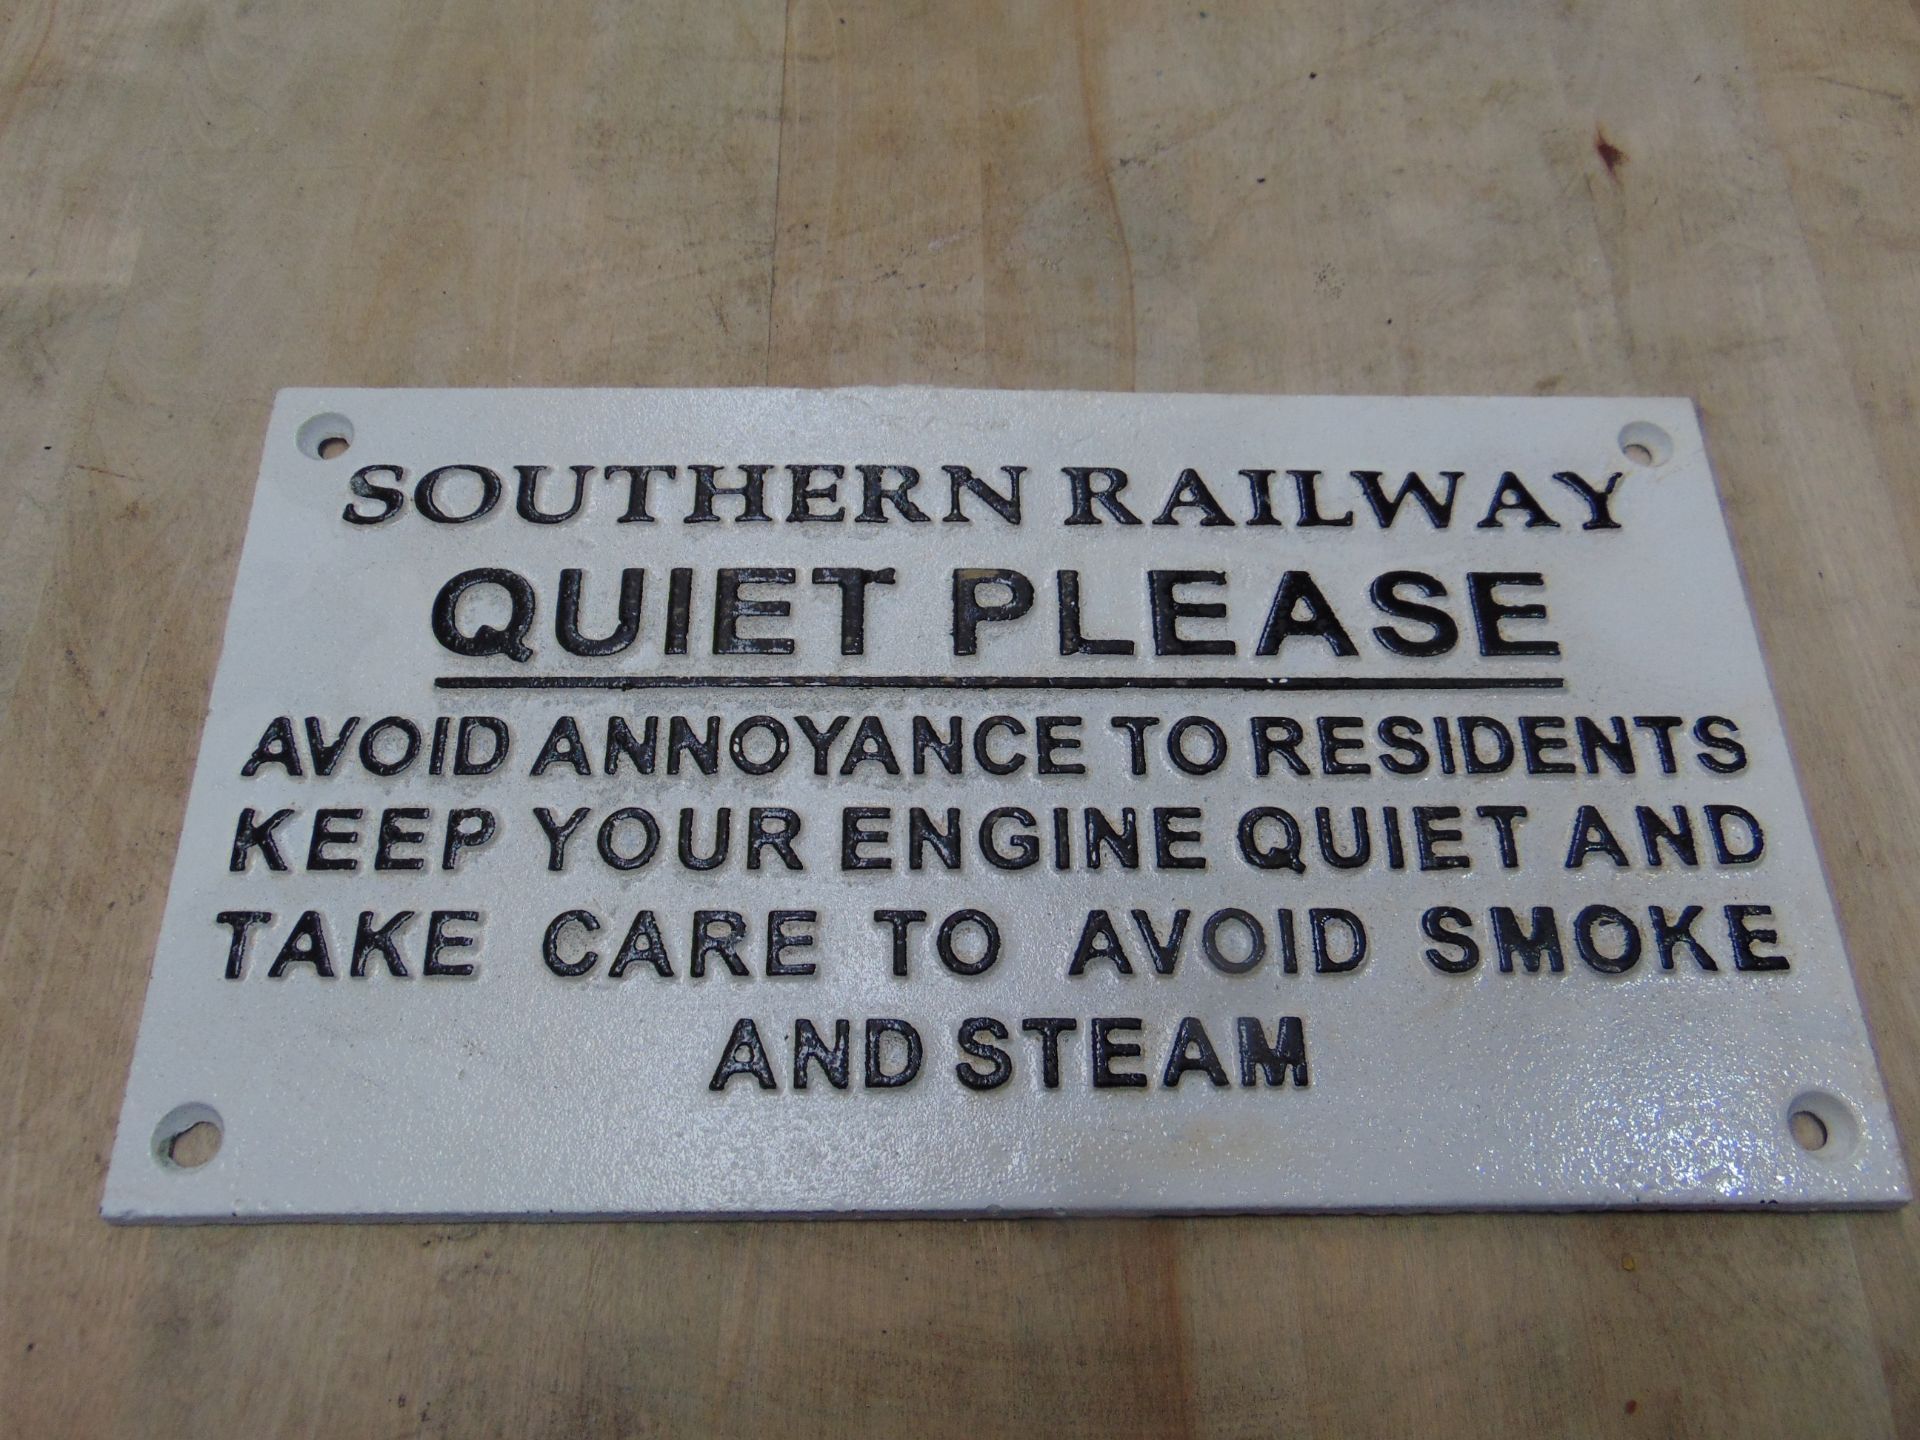 SOUTHERN RAILWAY CAST IRON SIGN